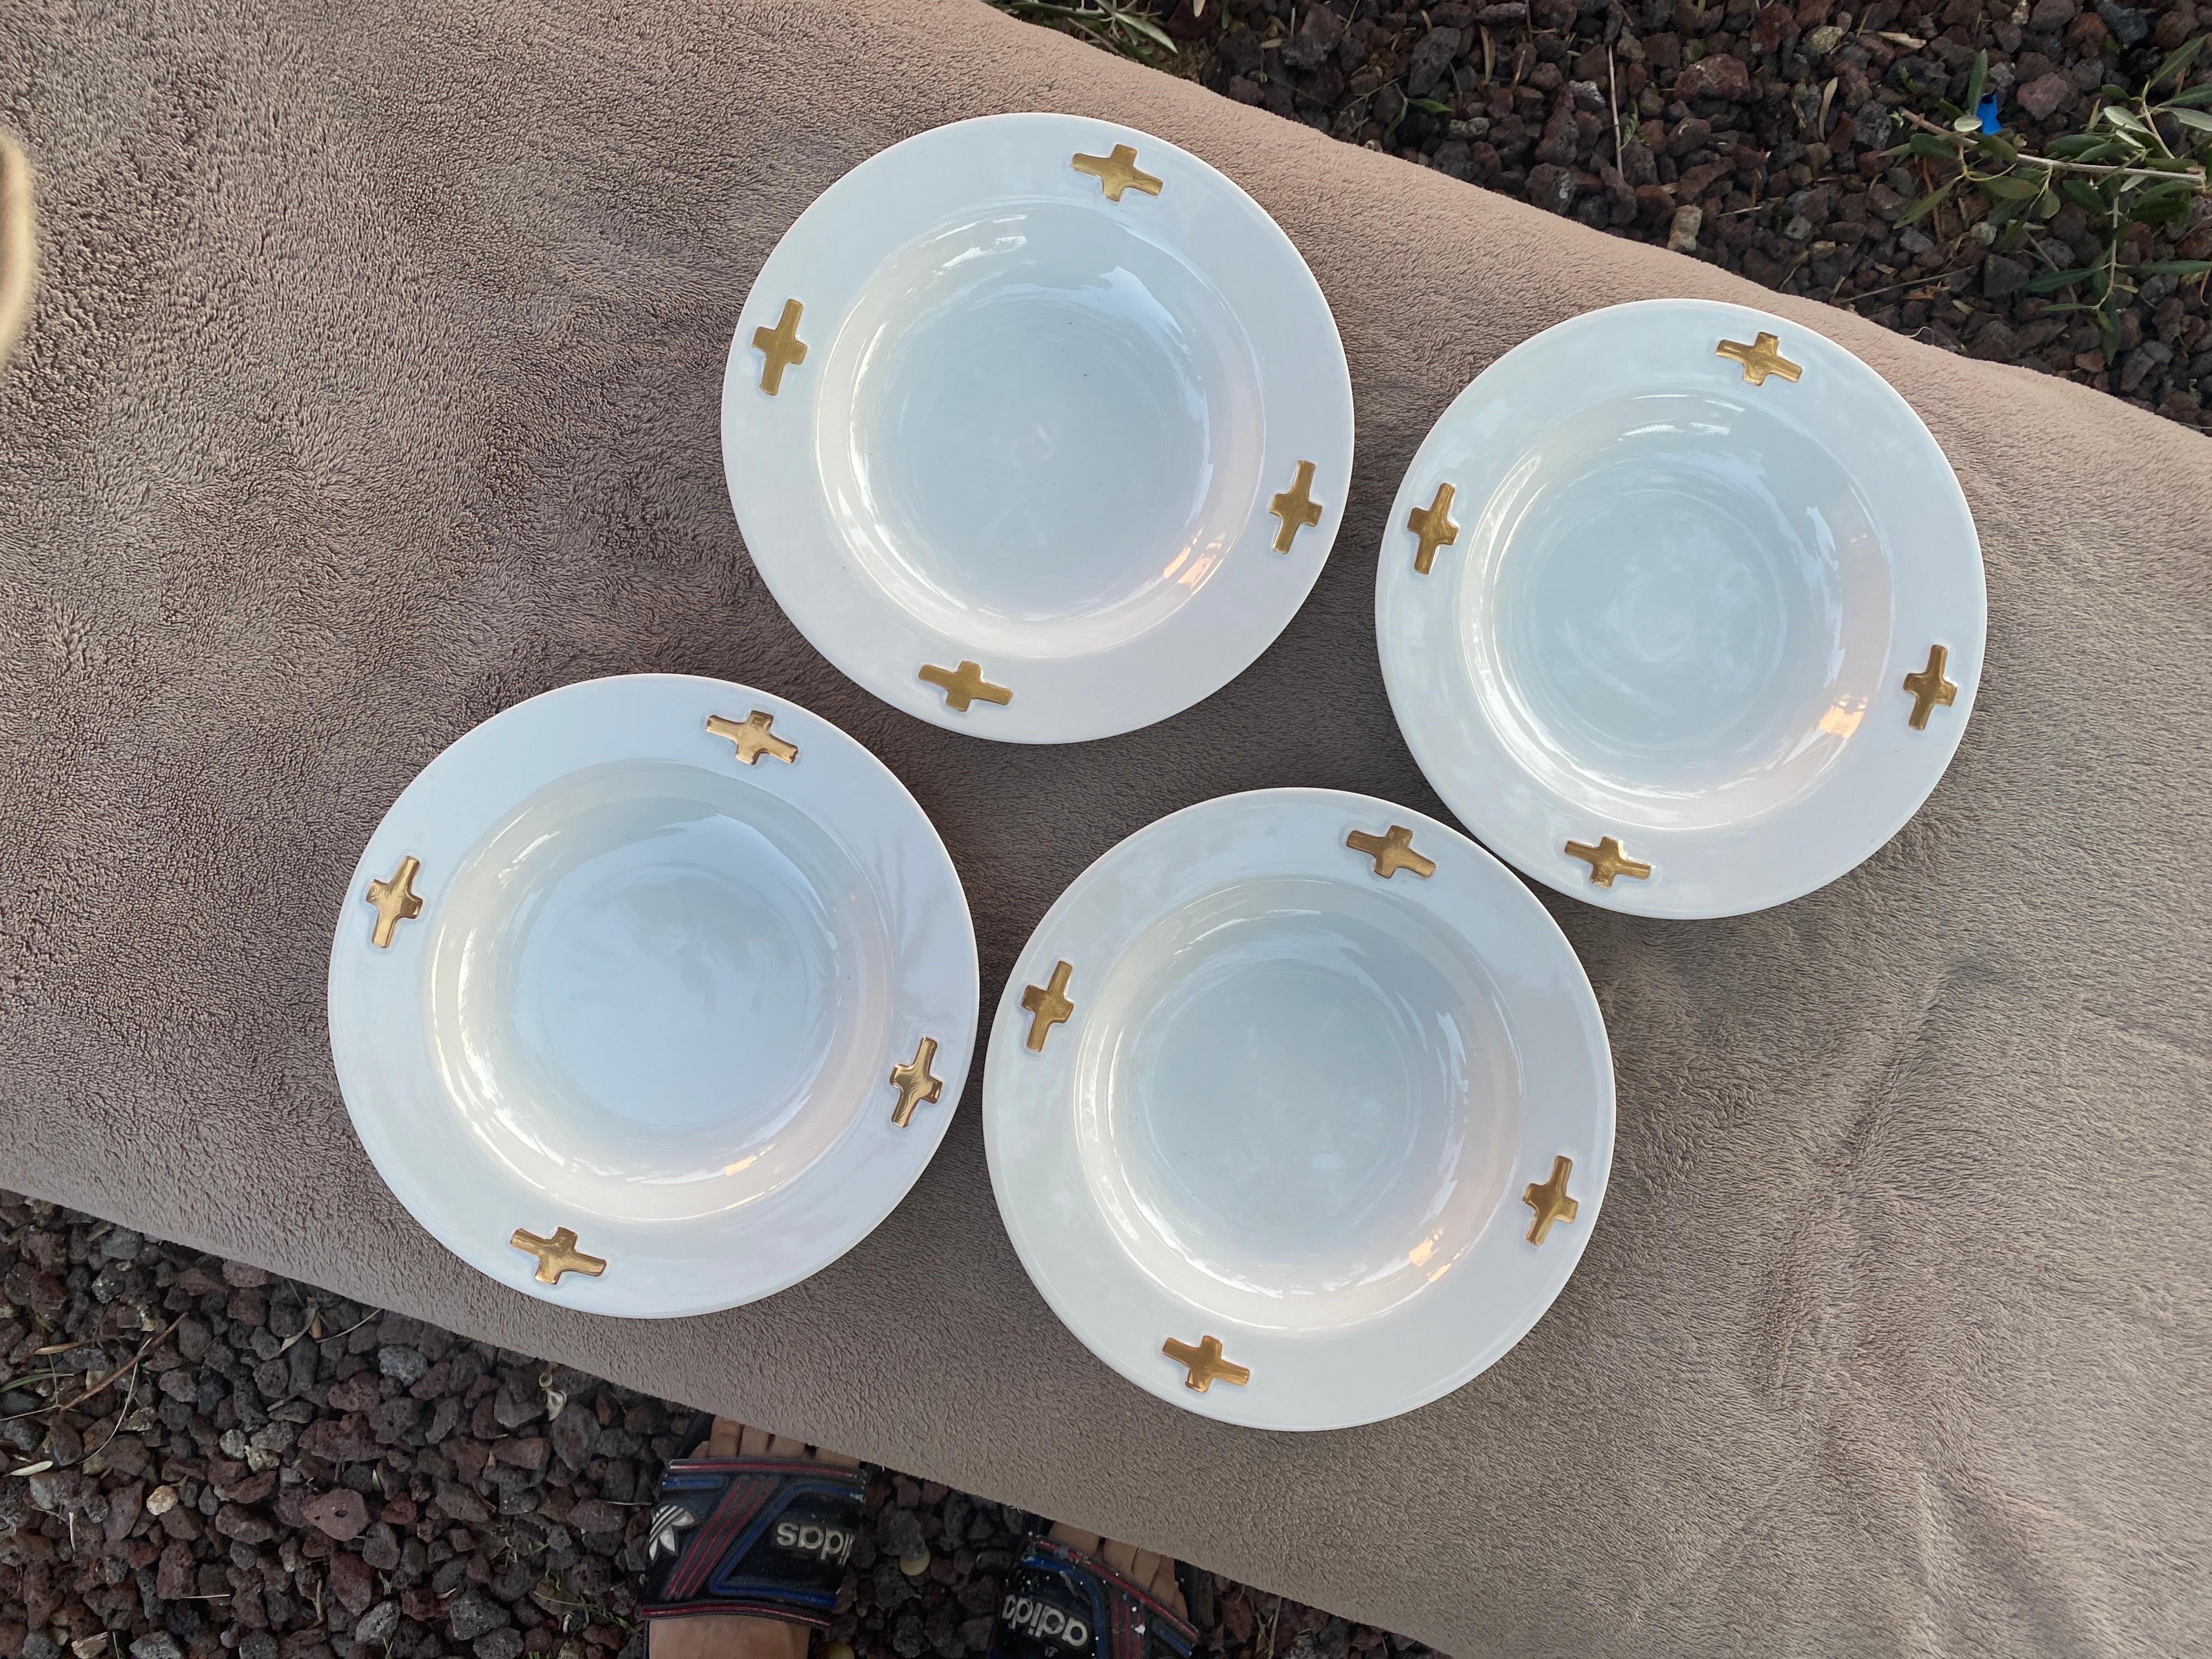 This set of dinnerware bowls were designed by the legendary jewelry and fine art designer, Robert Lee Morris for Swid Powell. The pattern name is called Camelot and is a chic, modern design of shiny white with 4 metallic gold crosses. It is almost